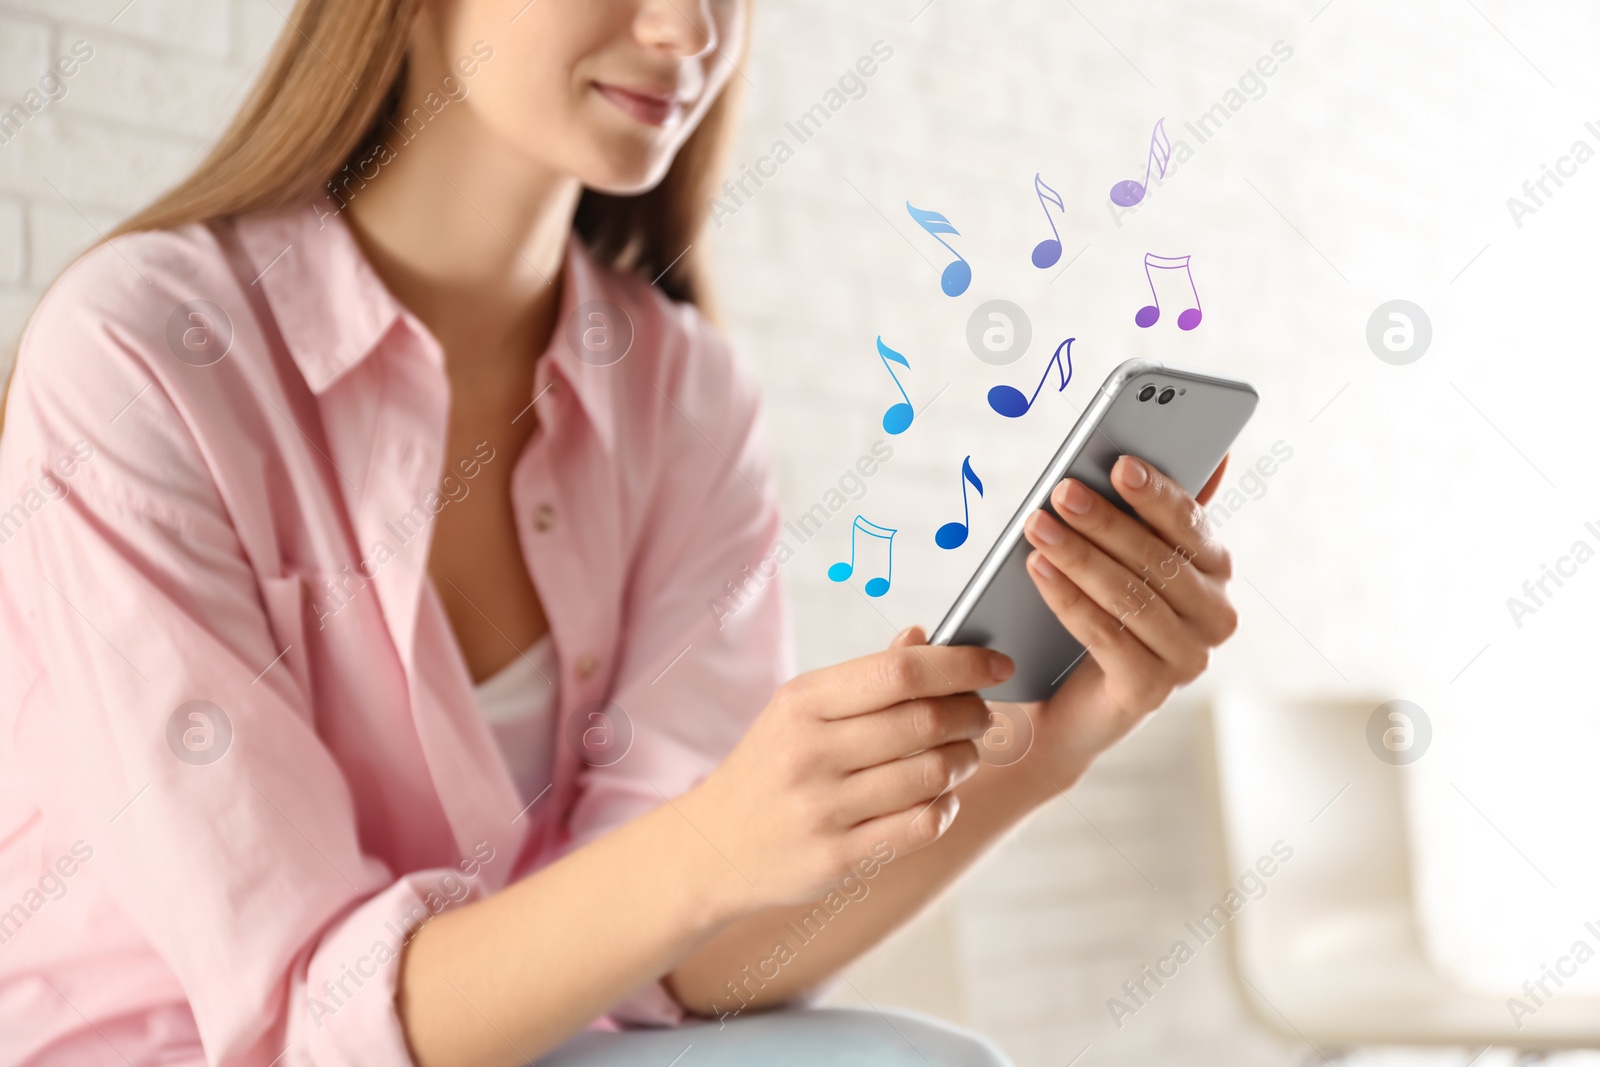 Image of Woman listening to music on mobile phone indoors, closeup. Music notes illustrations over gadget